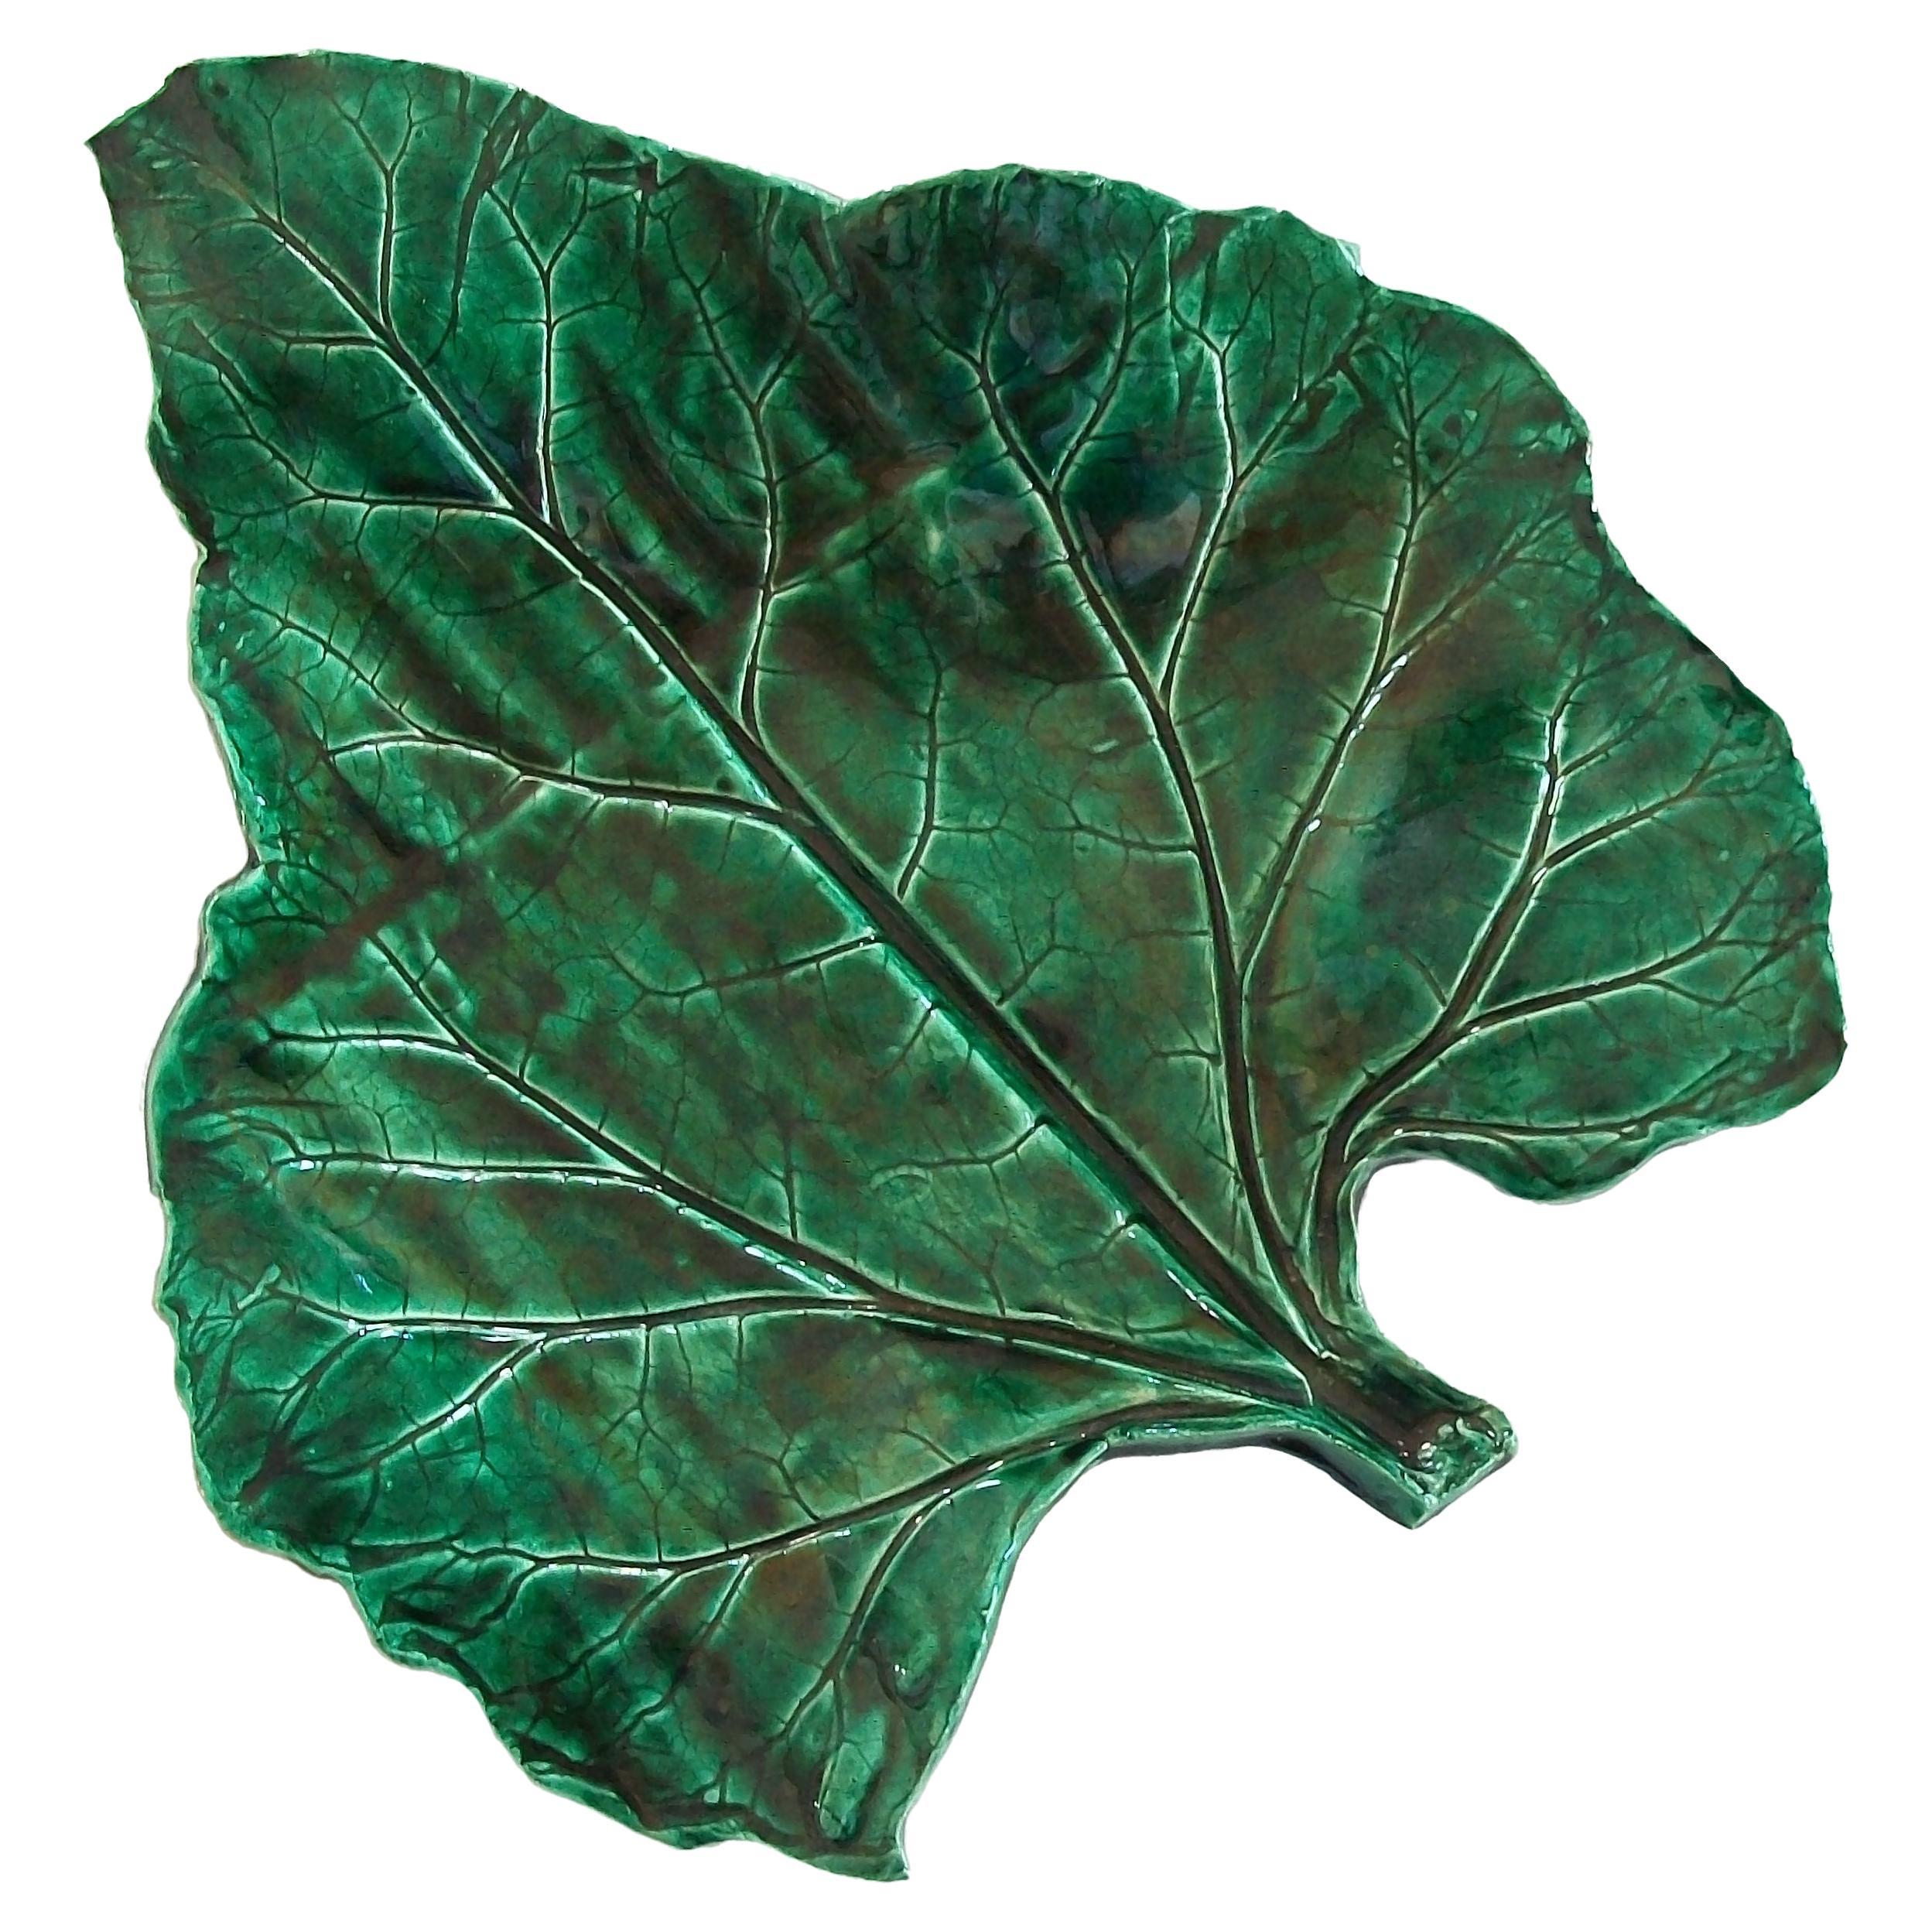 Vintage Studio Pottery Green Leaf Platter, Unsigned, Canada, 20th Century